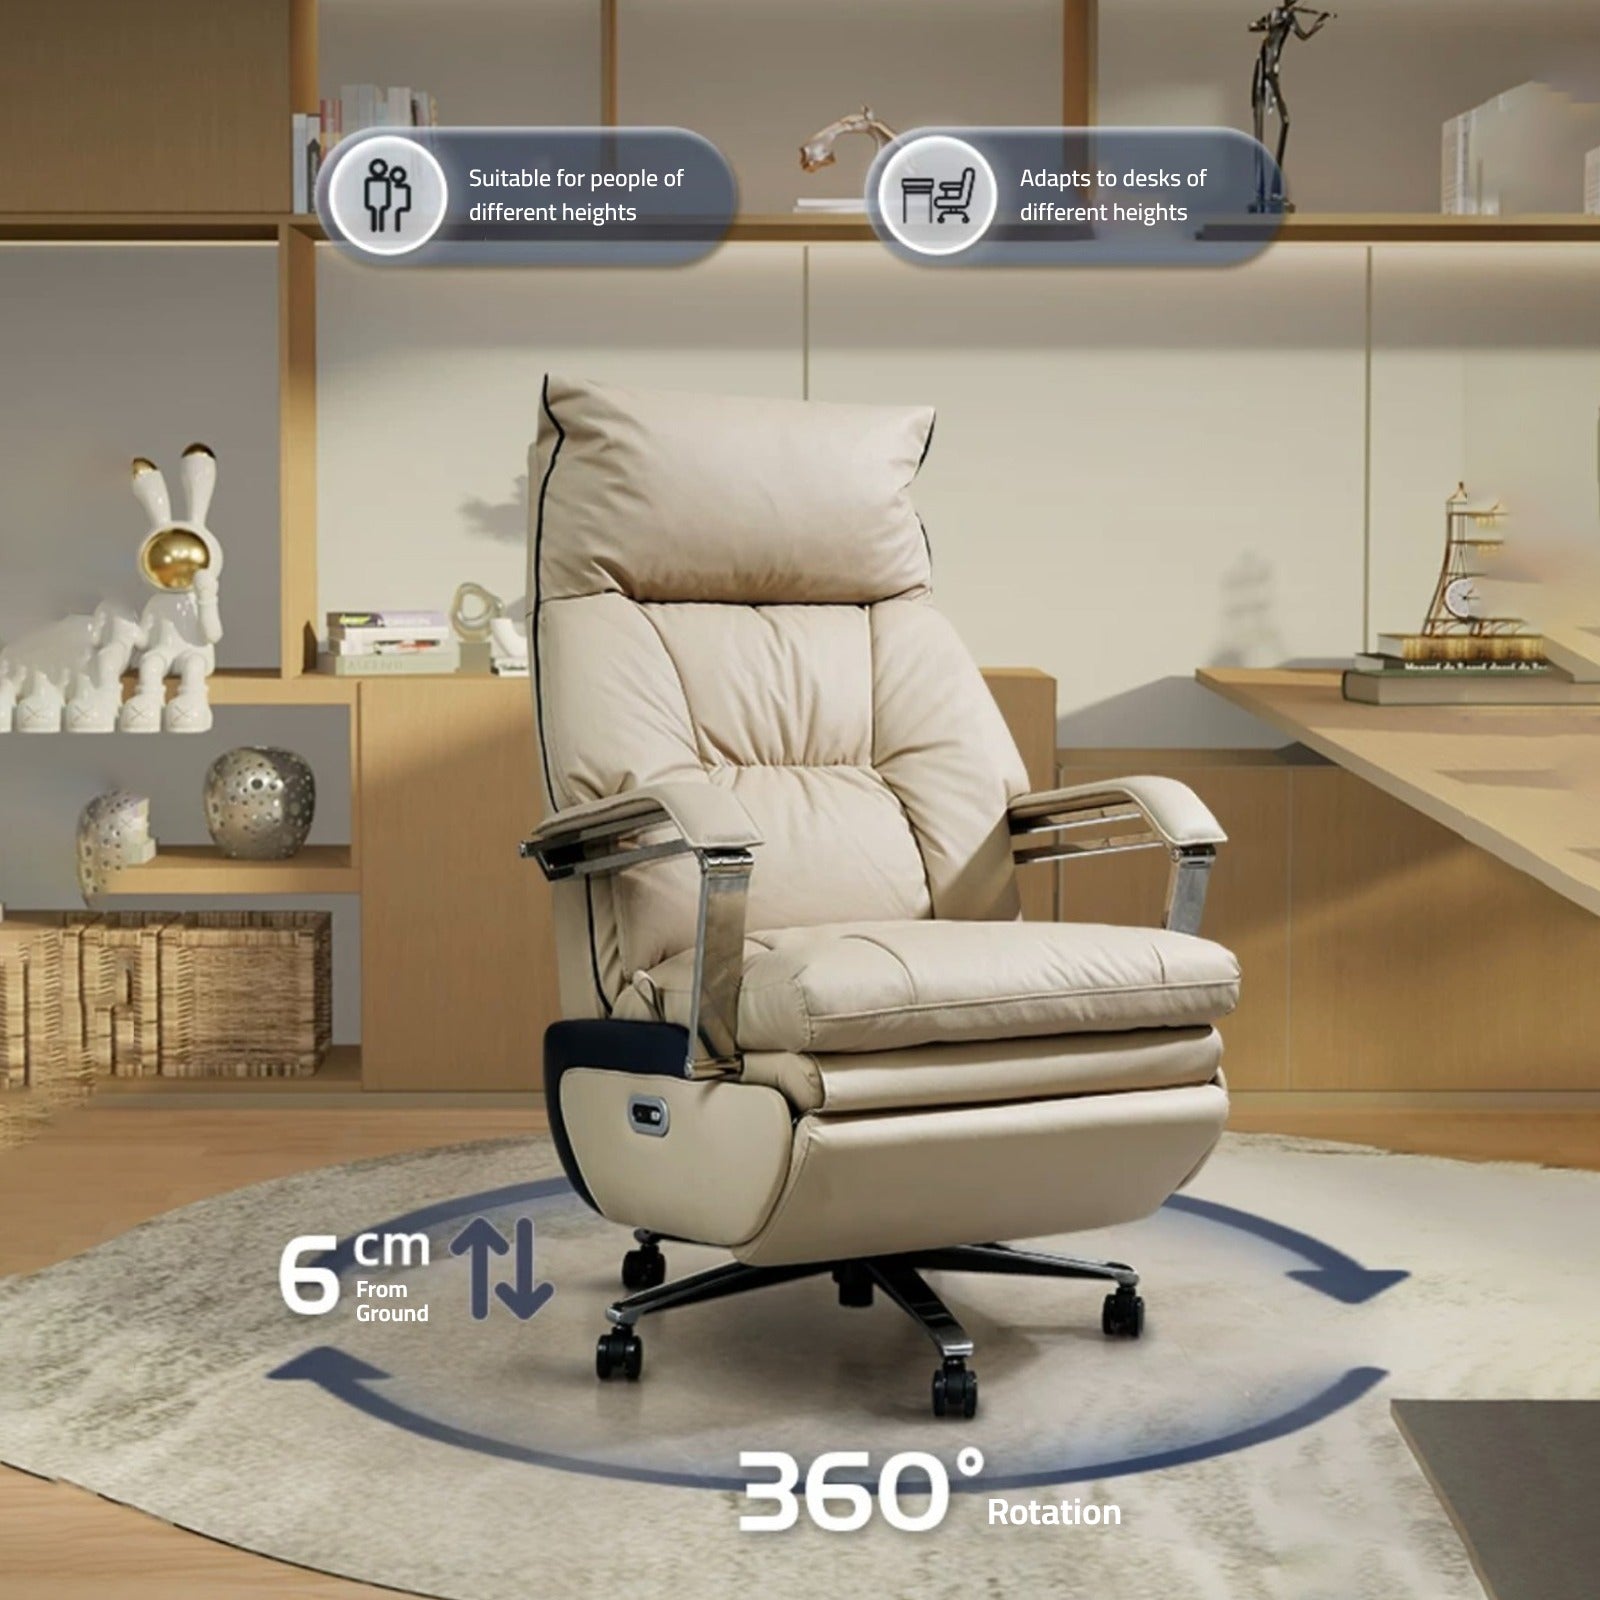 Image displaying an Adjustable Electric Office Chair placed in a room and the image mentions the compatibility of it 